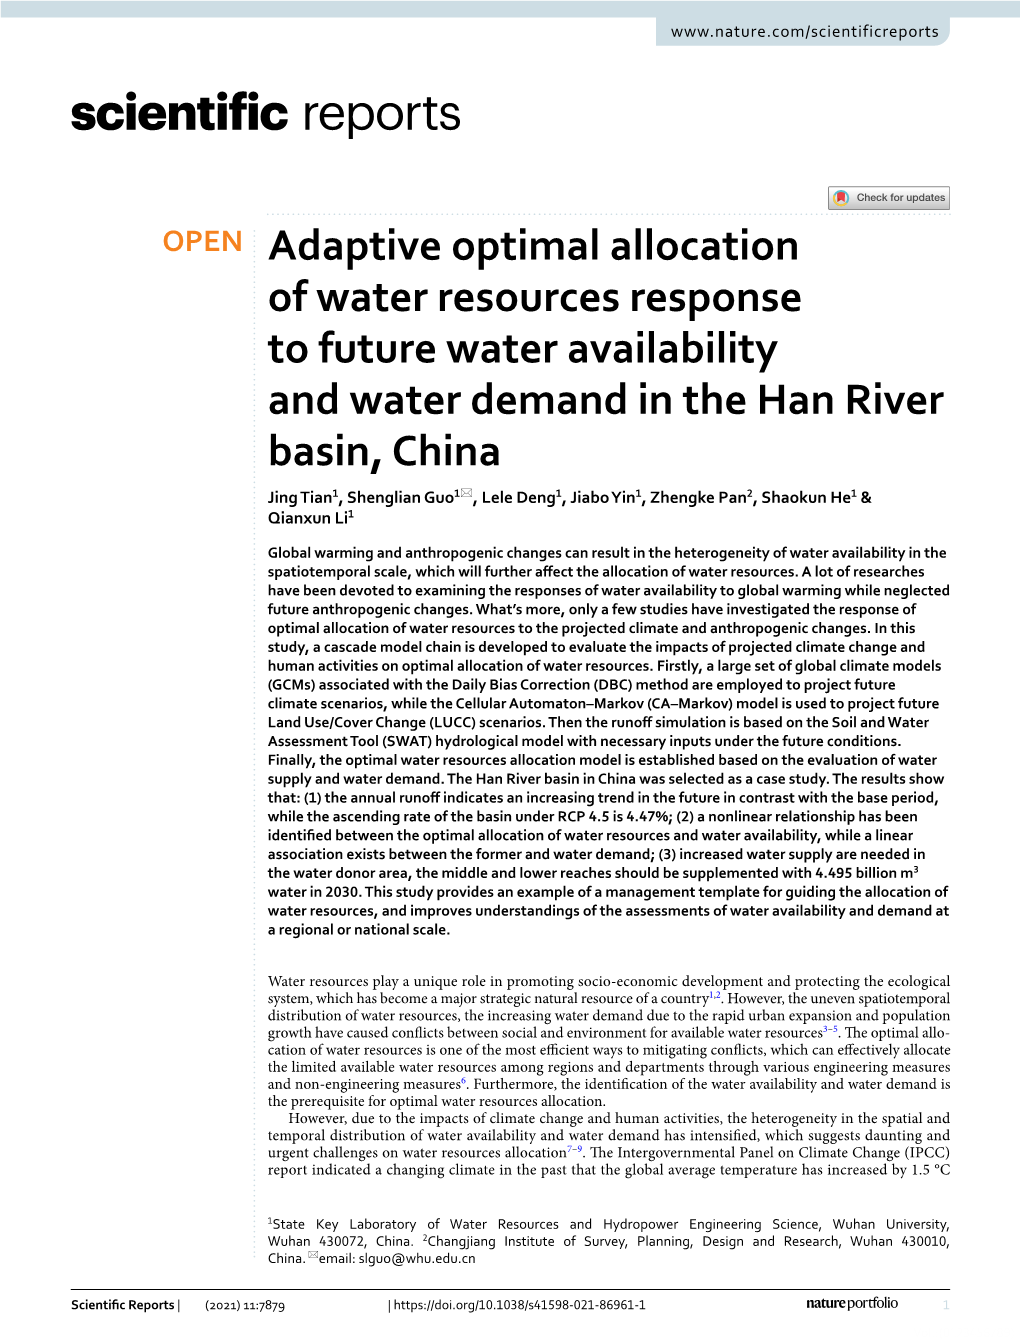 Adaptive Optimal Allocation of Water Resources Response to Future Water